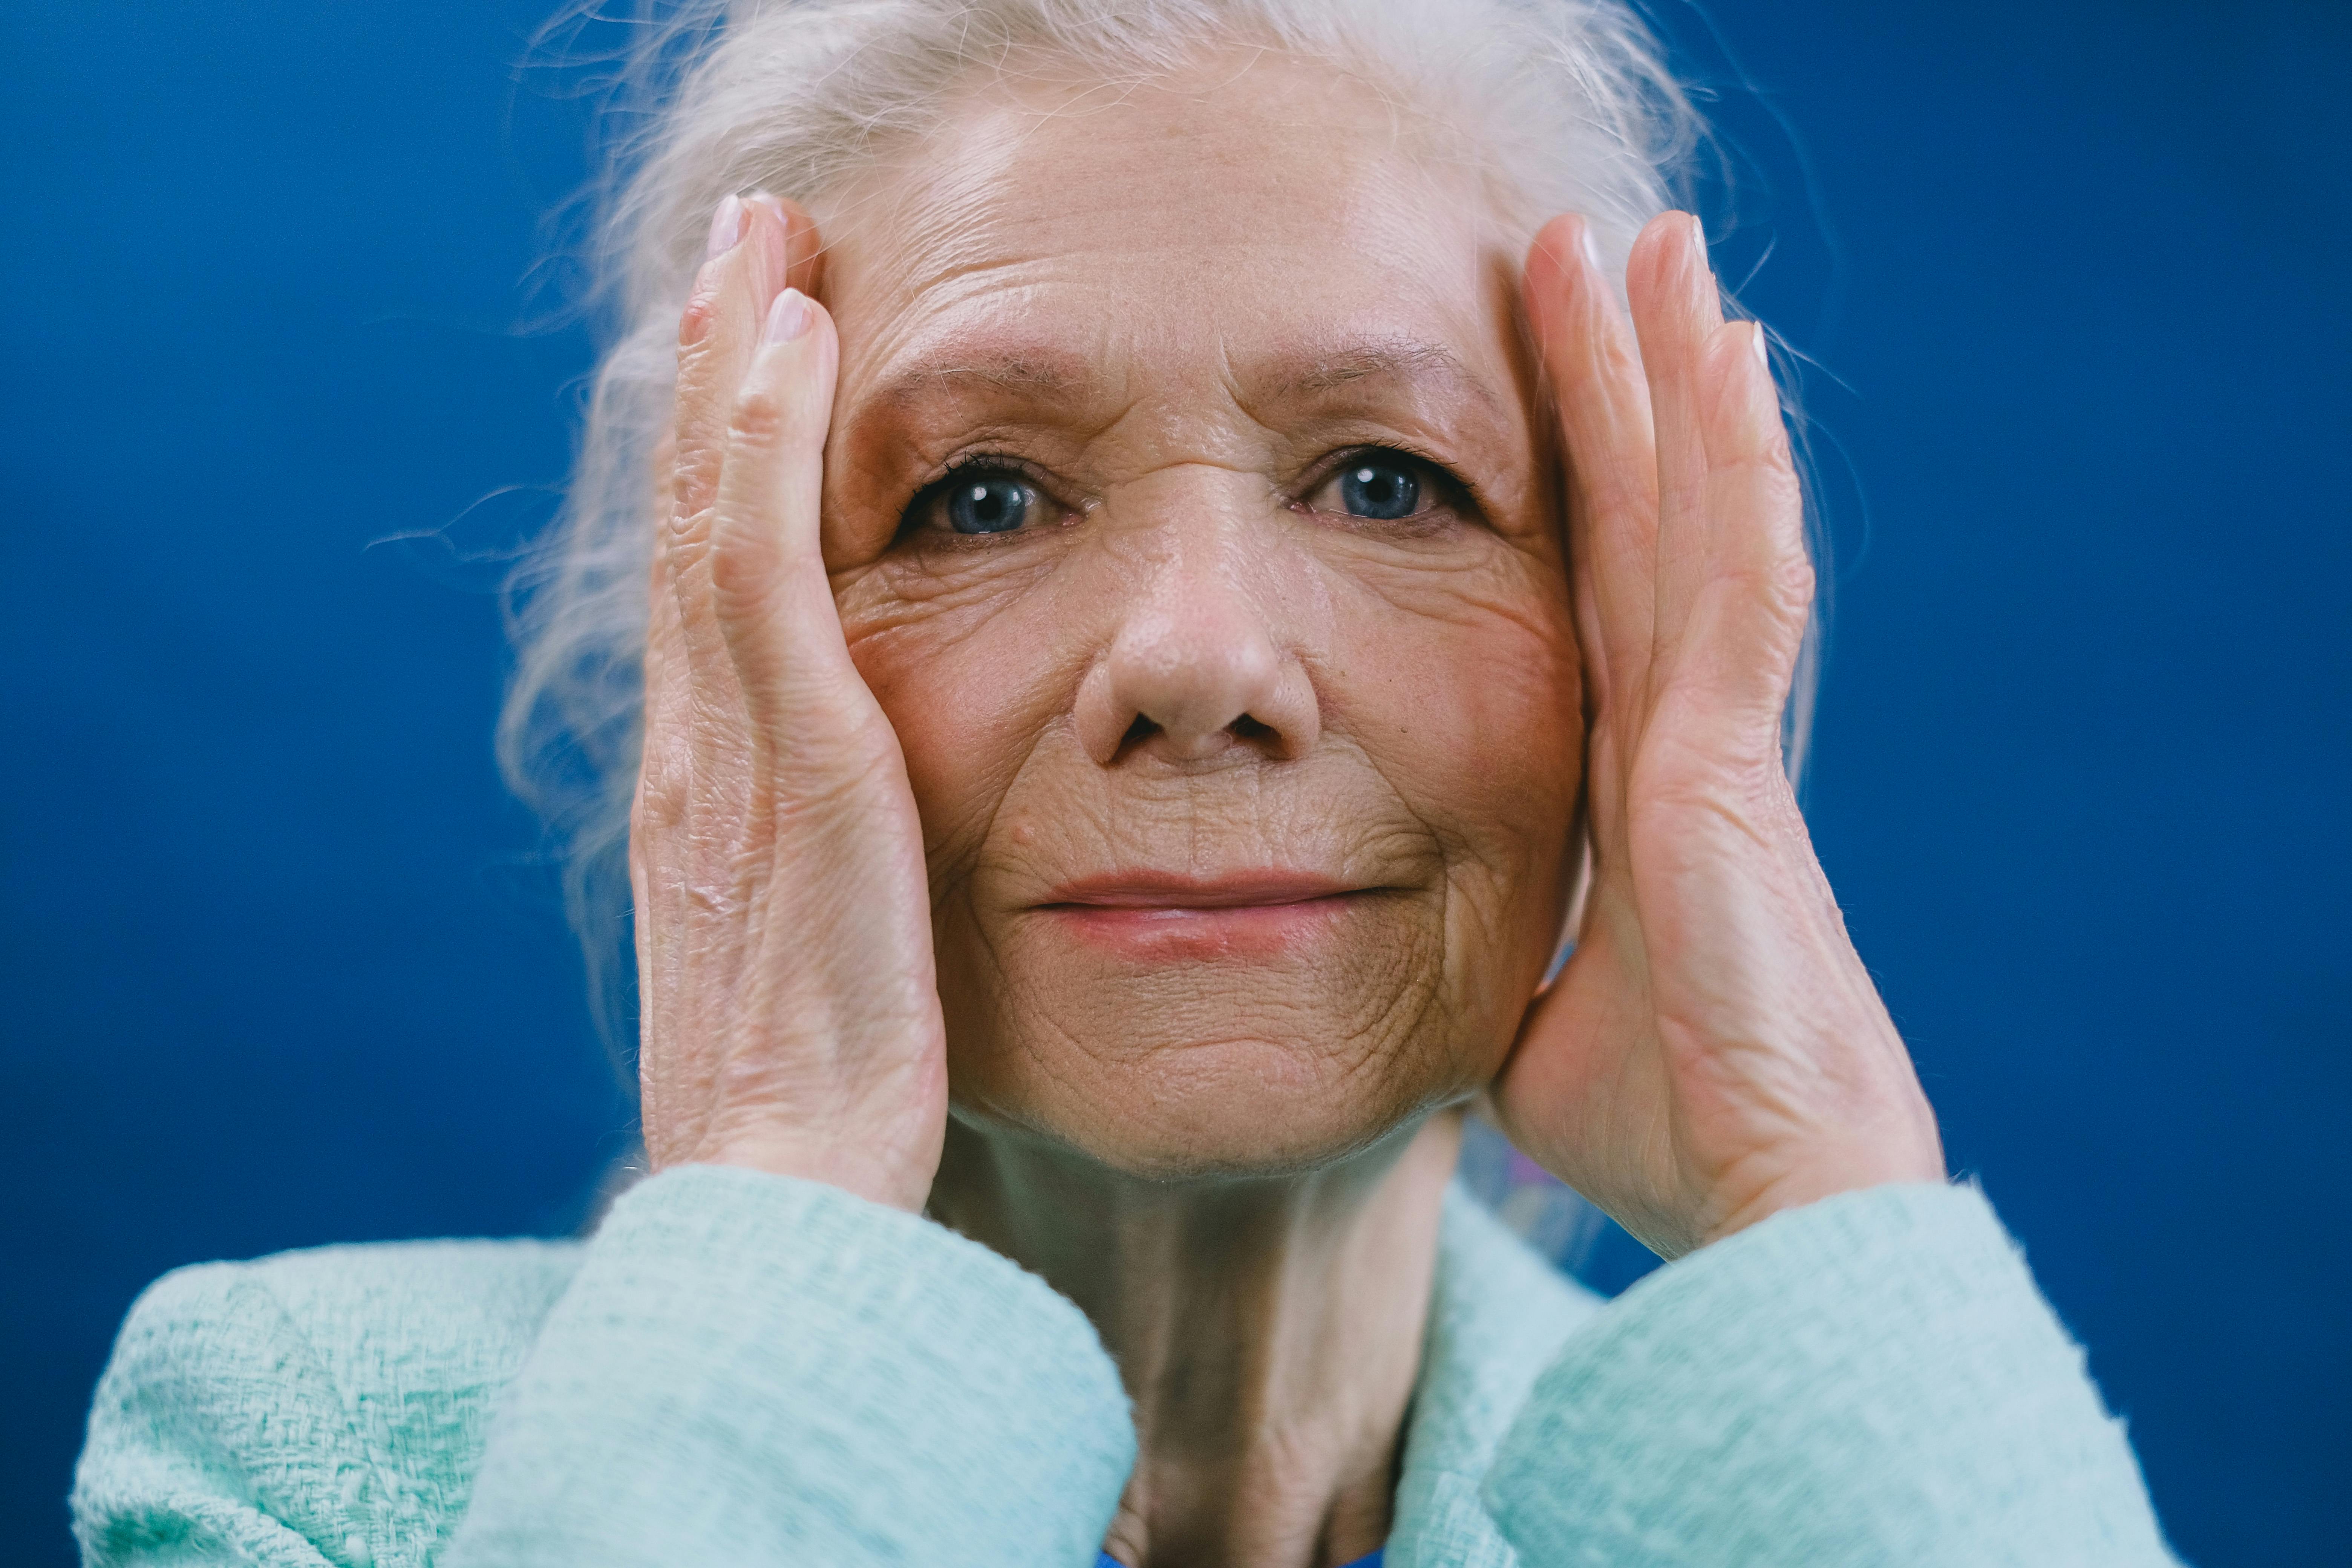 A senior woman with her hands on either side of her head | Source: Pexels